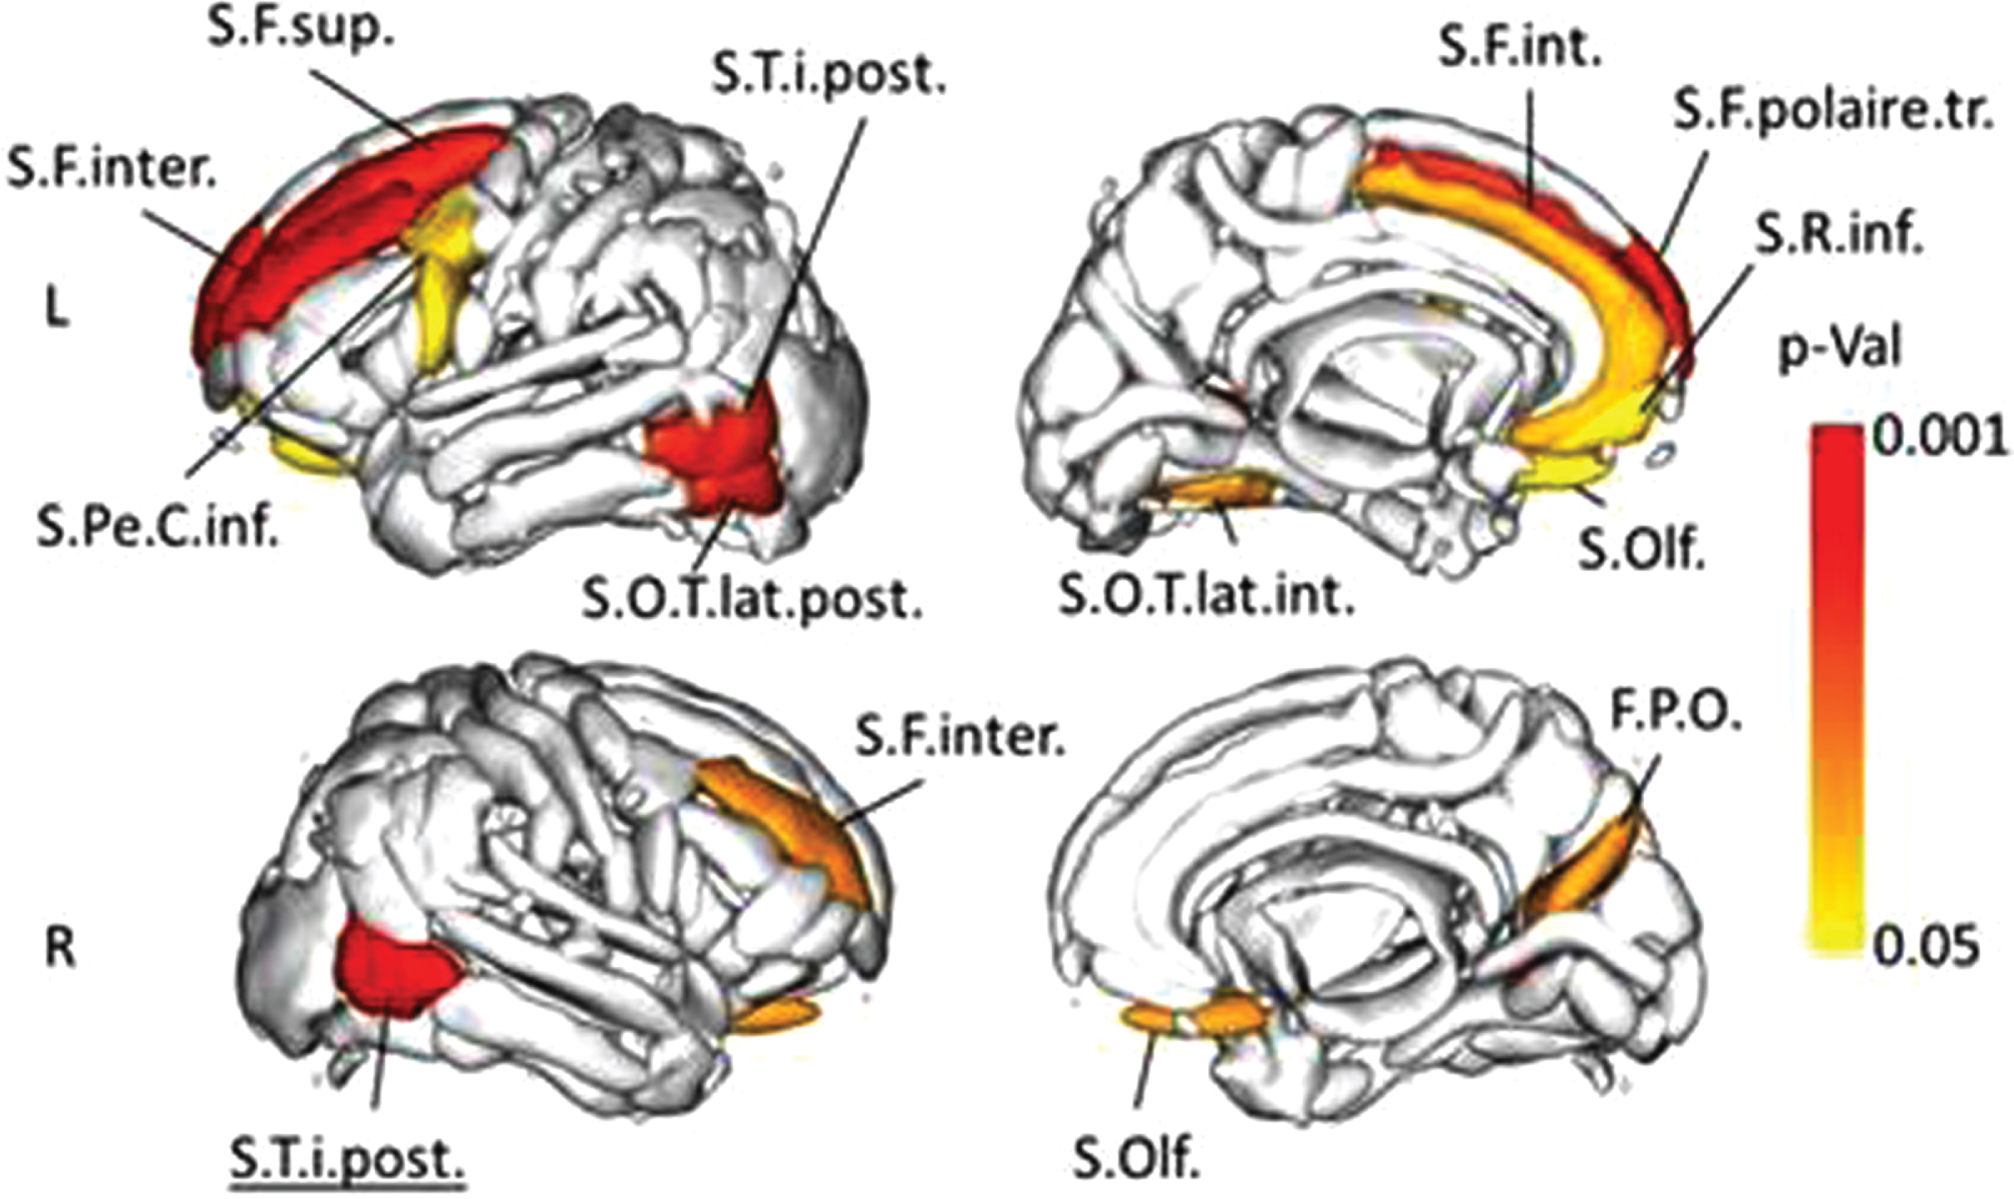 Representation of the sulci whose width exhibited a statistically different value between MCIc and MCInc. The color intensity describes the significance of the result (MCIc > MCInc). S.T.i.post., posterior inferior temporal sulcus; S.F.inter., intermediate frontal sulcus; S.F.sup., superior frontal sulcus; S.F.polaire.tr., polar frontal sulcus; S.O.T.lat.post., posterior occipito-temporal lateral sulcus; S.O.T.lat.int., internal occipito-temporal lateral sulcus; S.Pe.C.inf., inferior precentral sulcus; S.Olf, olfactory sulcus; S.F.int., internal frontal sulcus; F.P.O., parieto-occipital fissure; S.R.inf., inferior rostral sulcus.